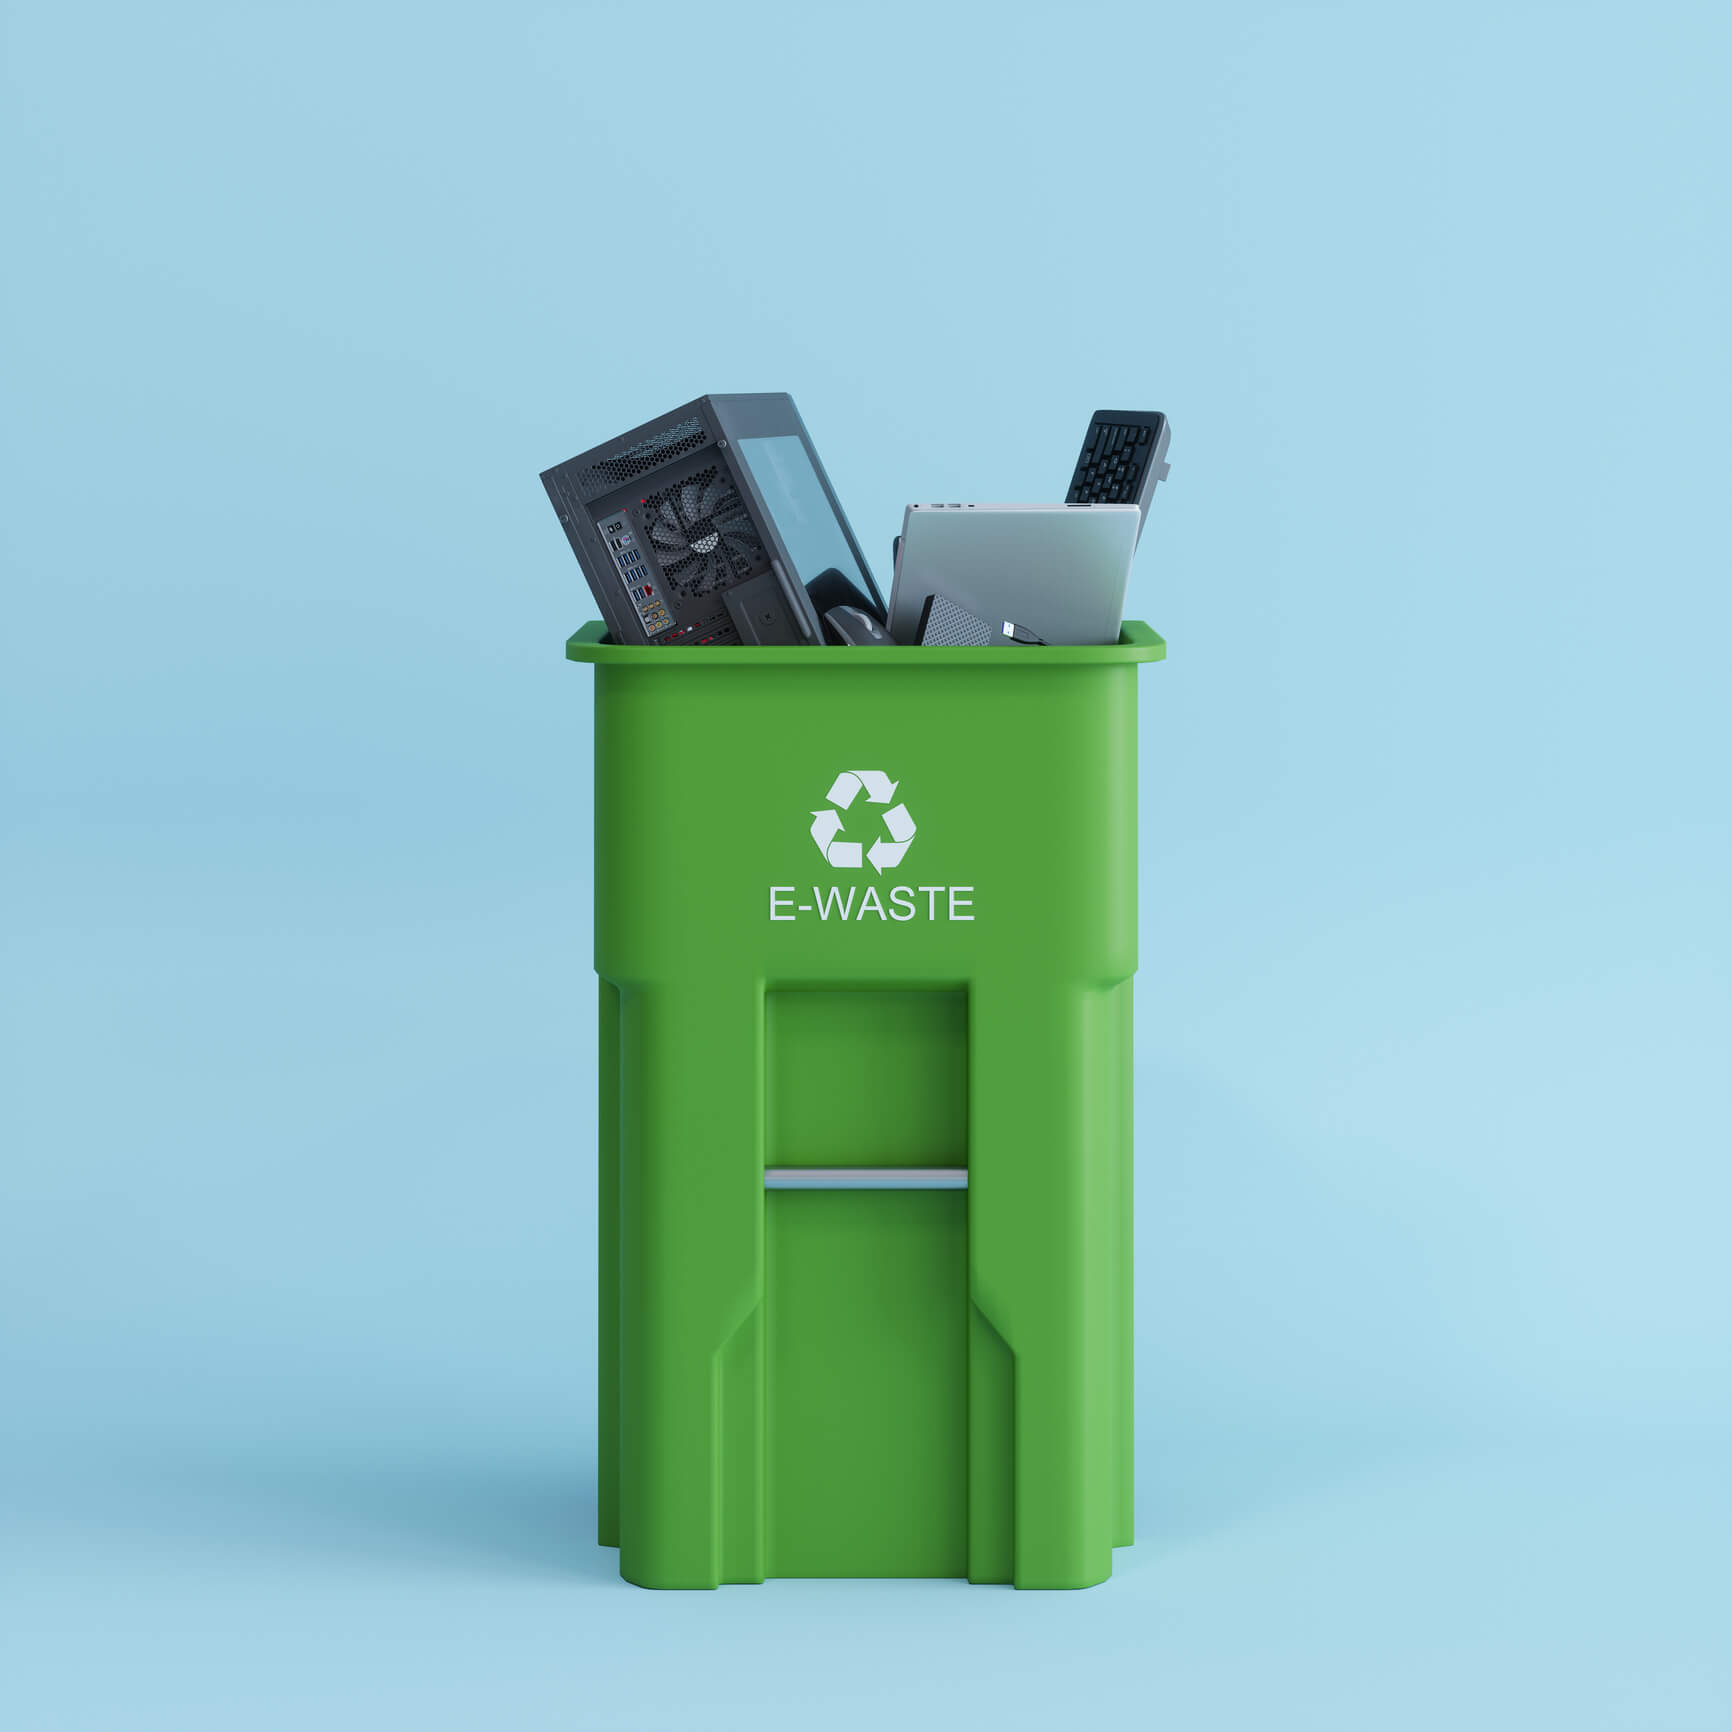 Recycle bin for electronic waste